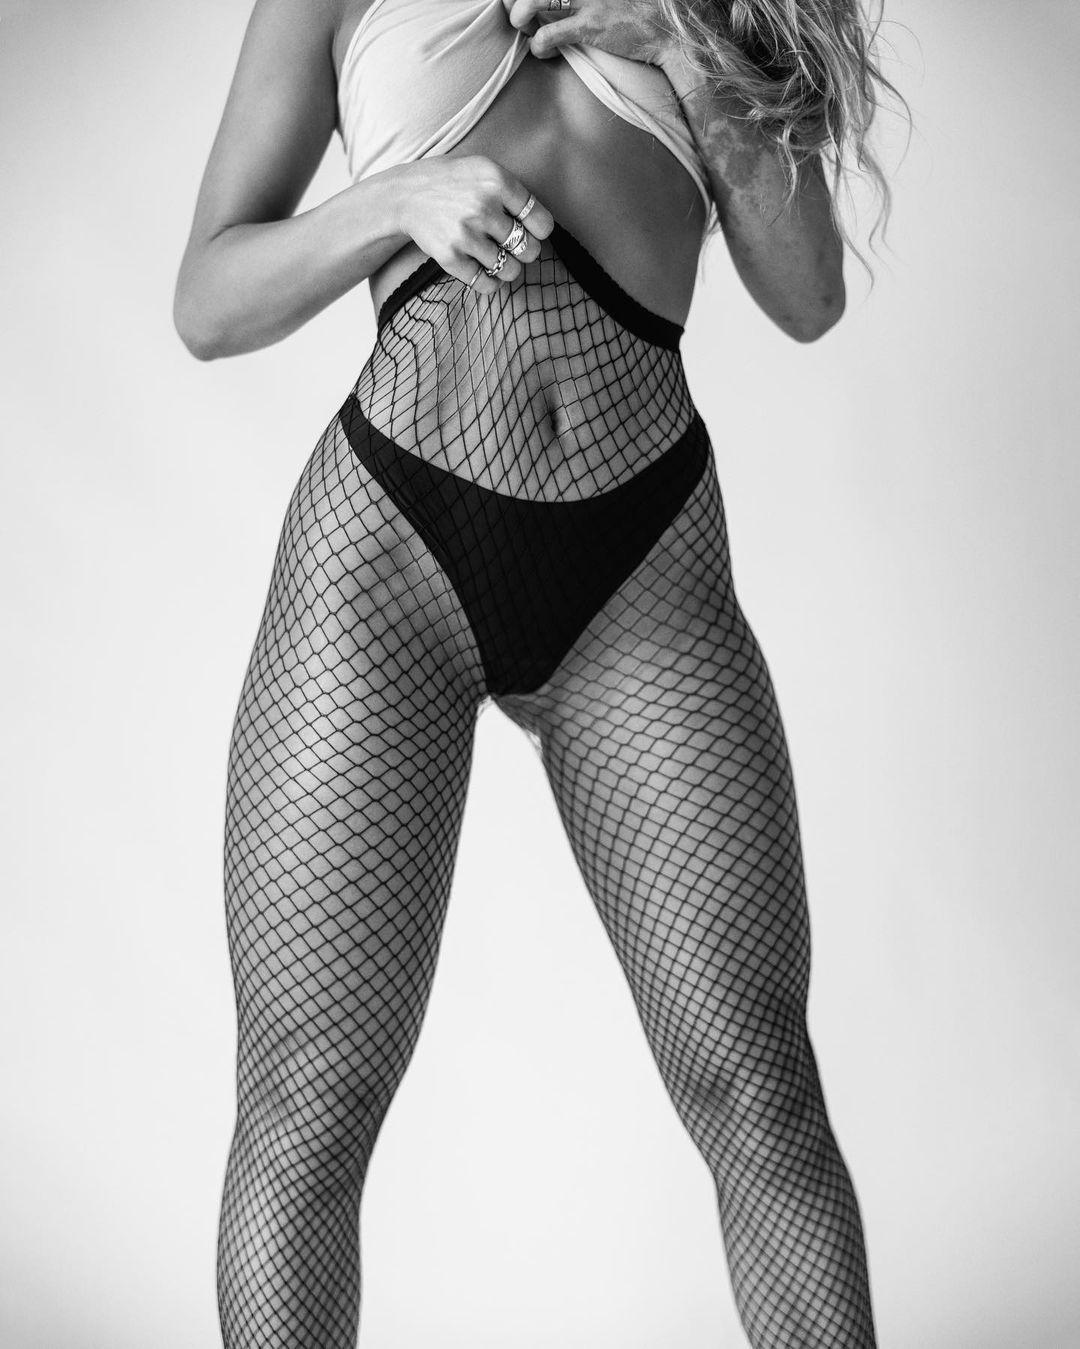 Sommer Ray In Fishnets And Boobs Out! You Have To See This